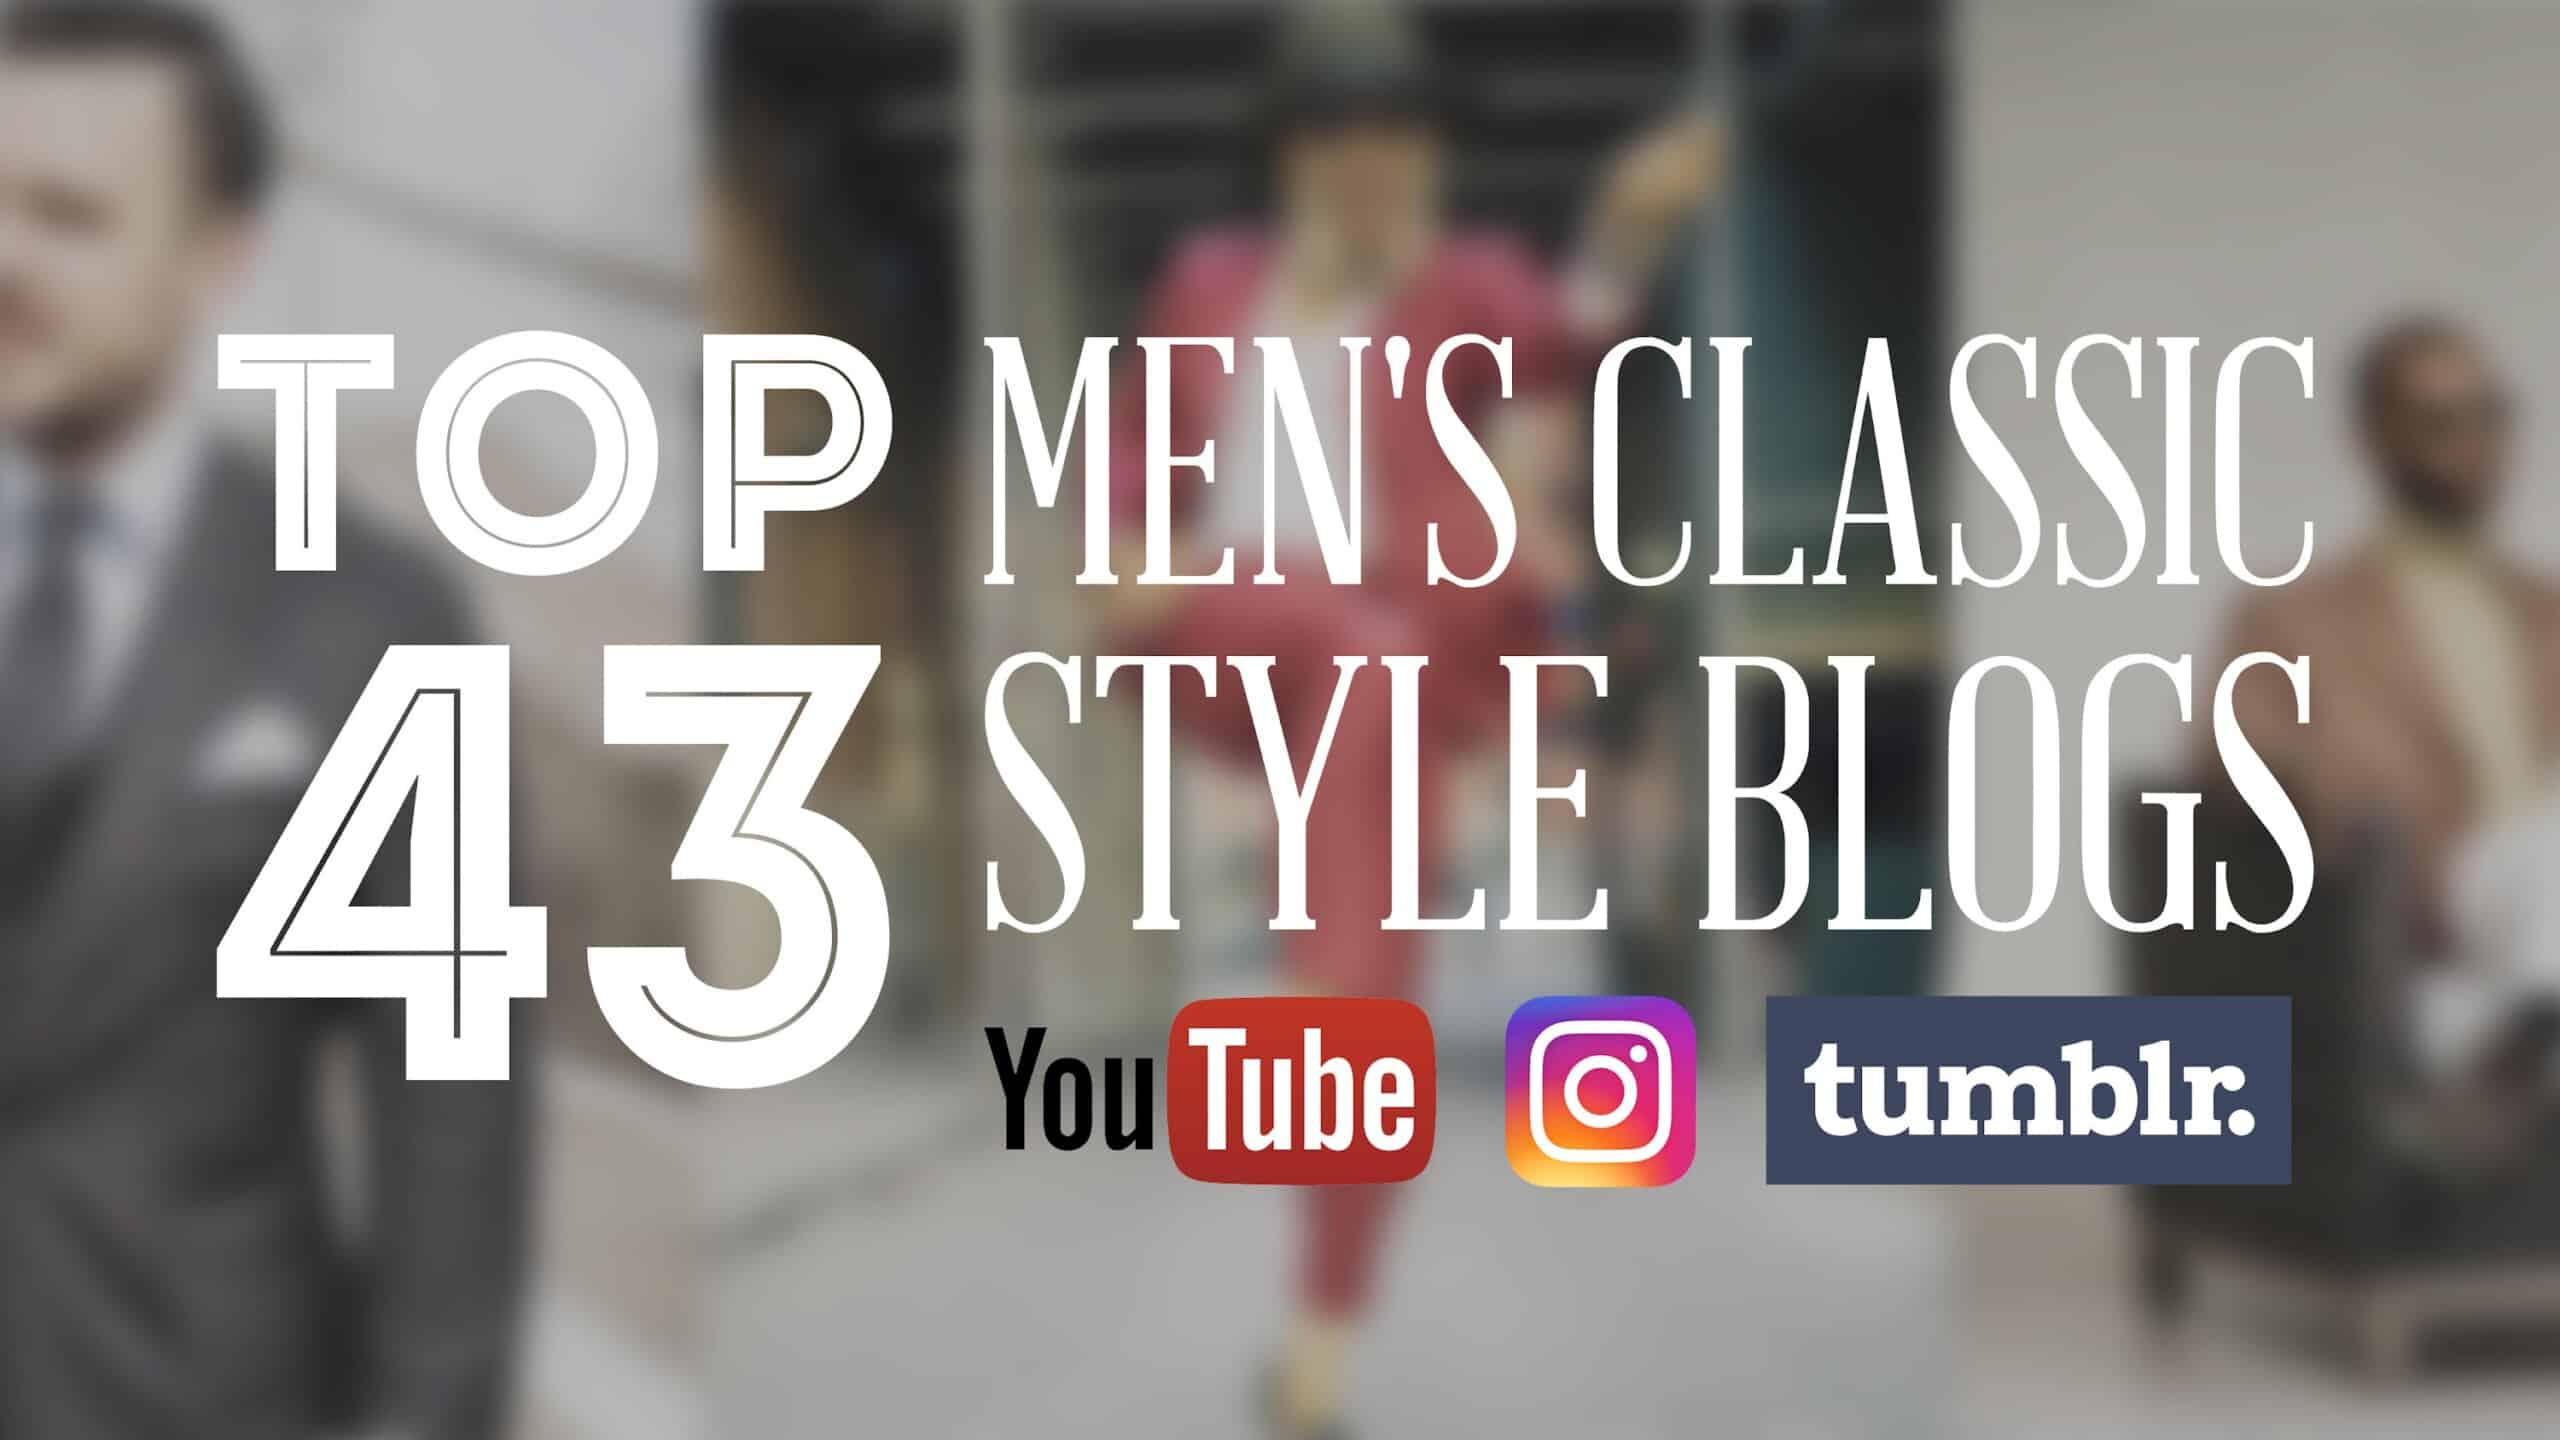 Top mens classic style blogs youtube channels instagram tumblr